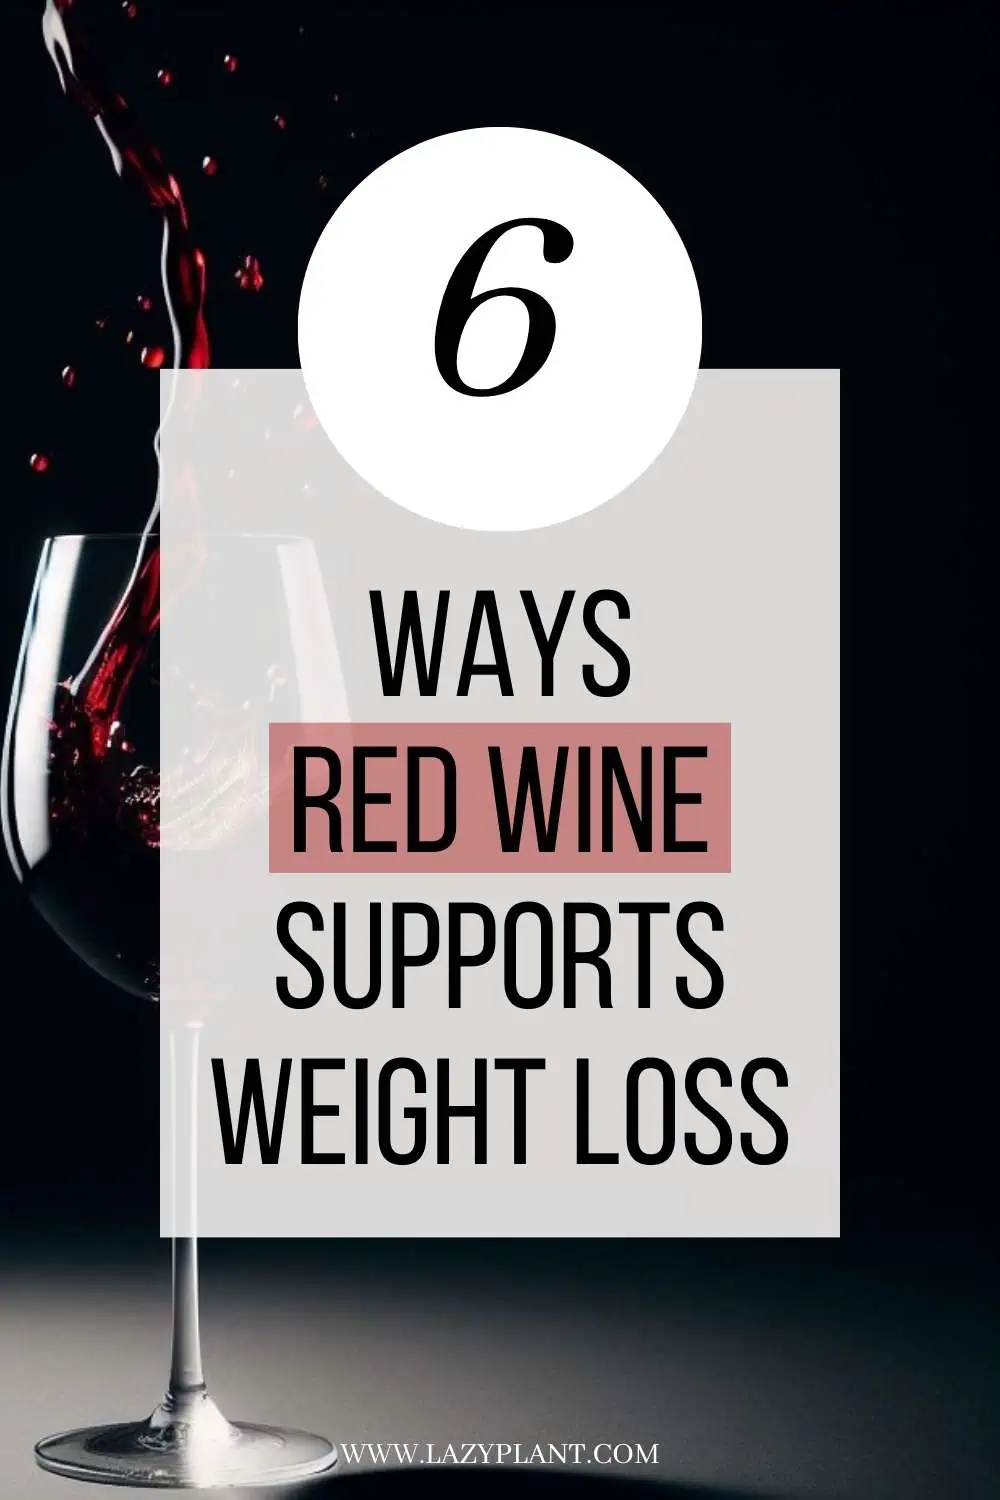 6 ways red Wine supports Weight Loss.